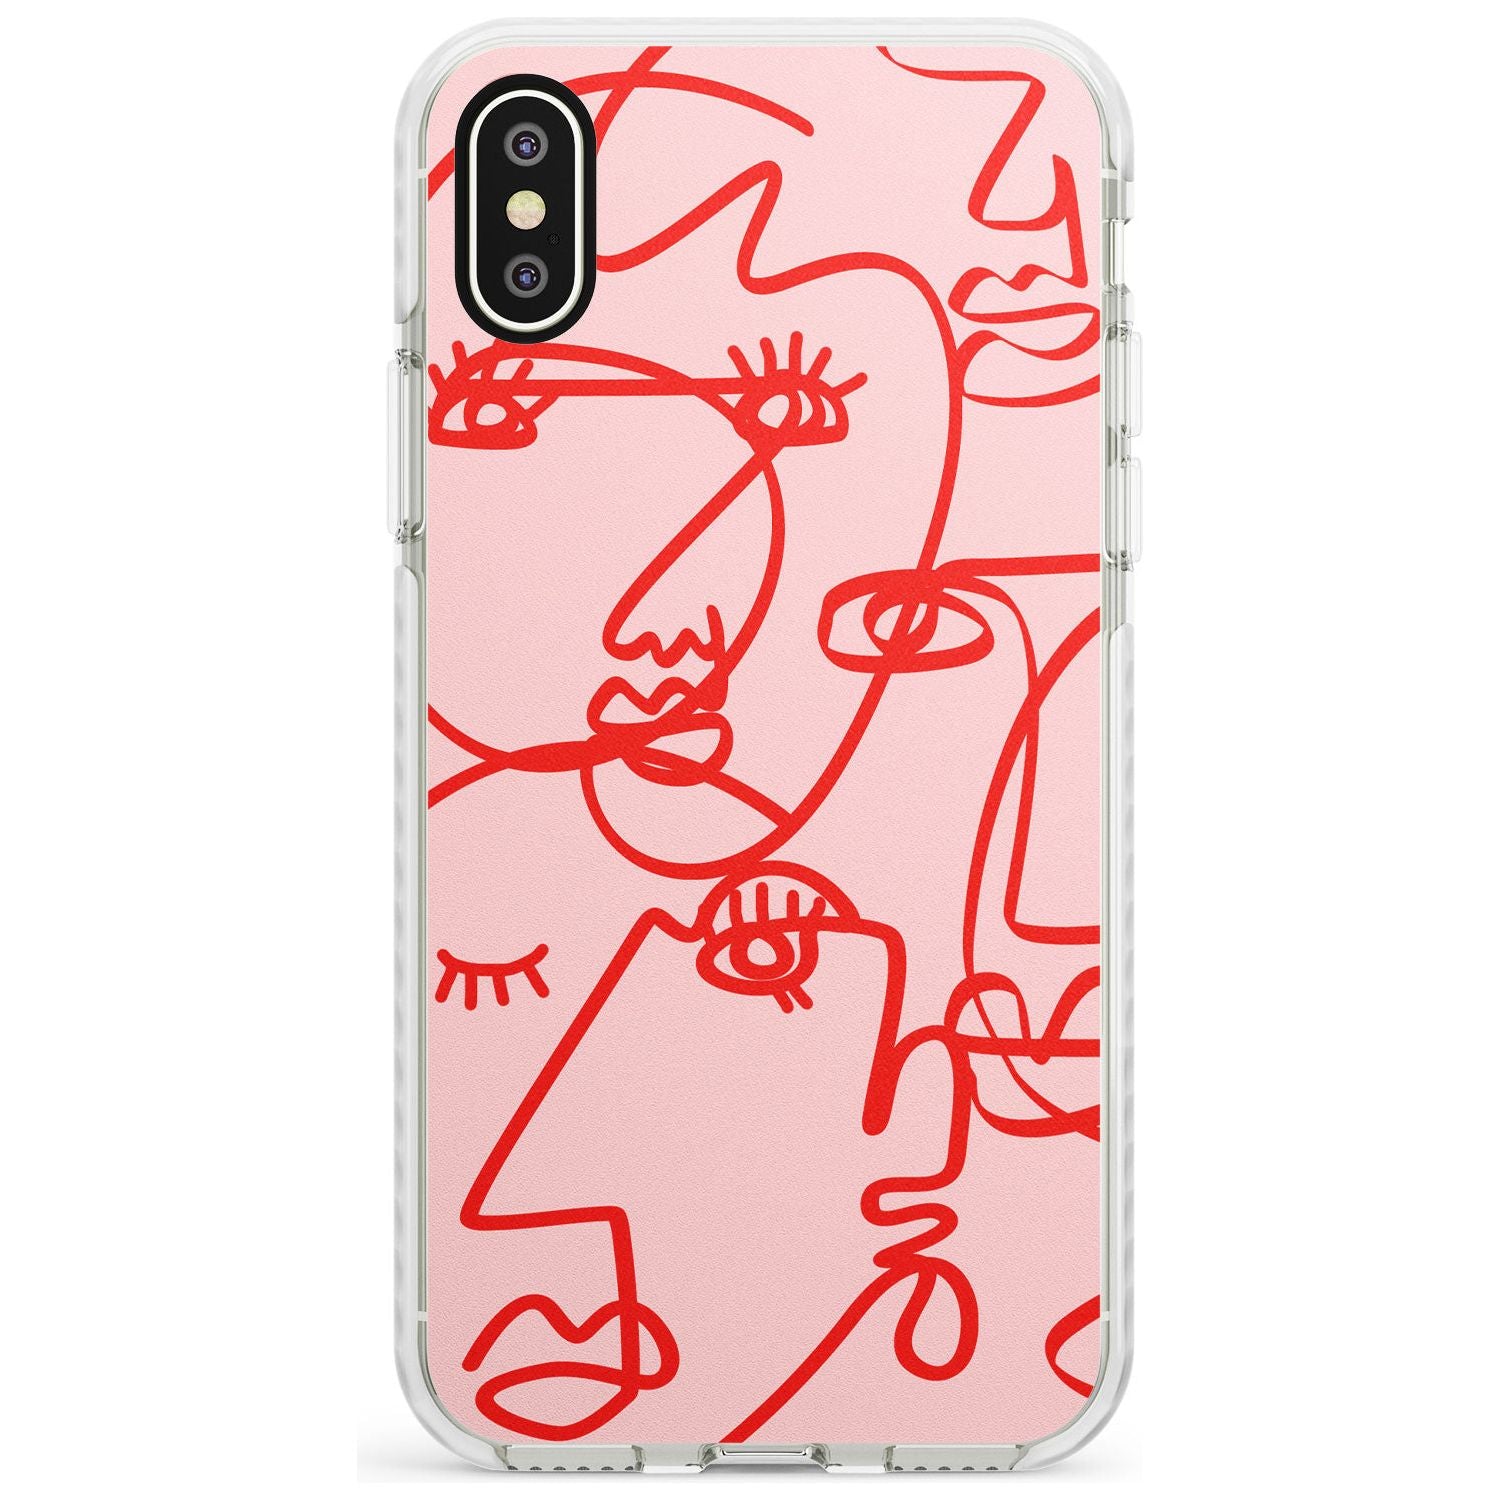 Continuous Line Faces: Red on Pink Slim TPU Phone Case Warehouse X XS Max XR